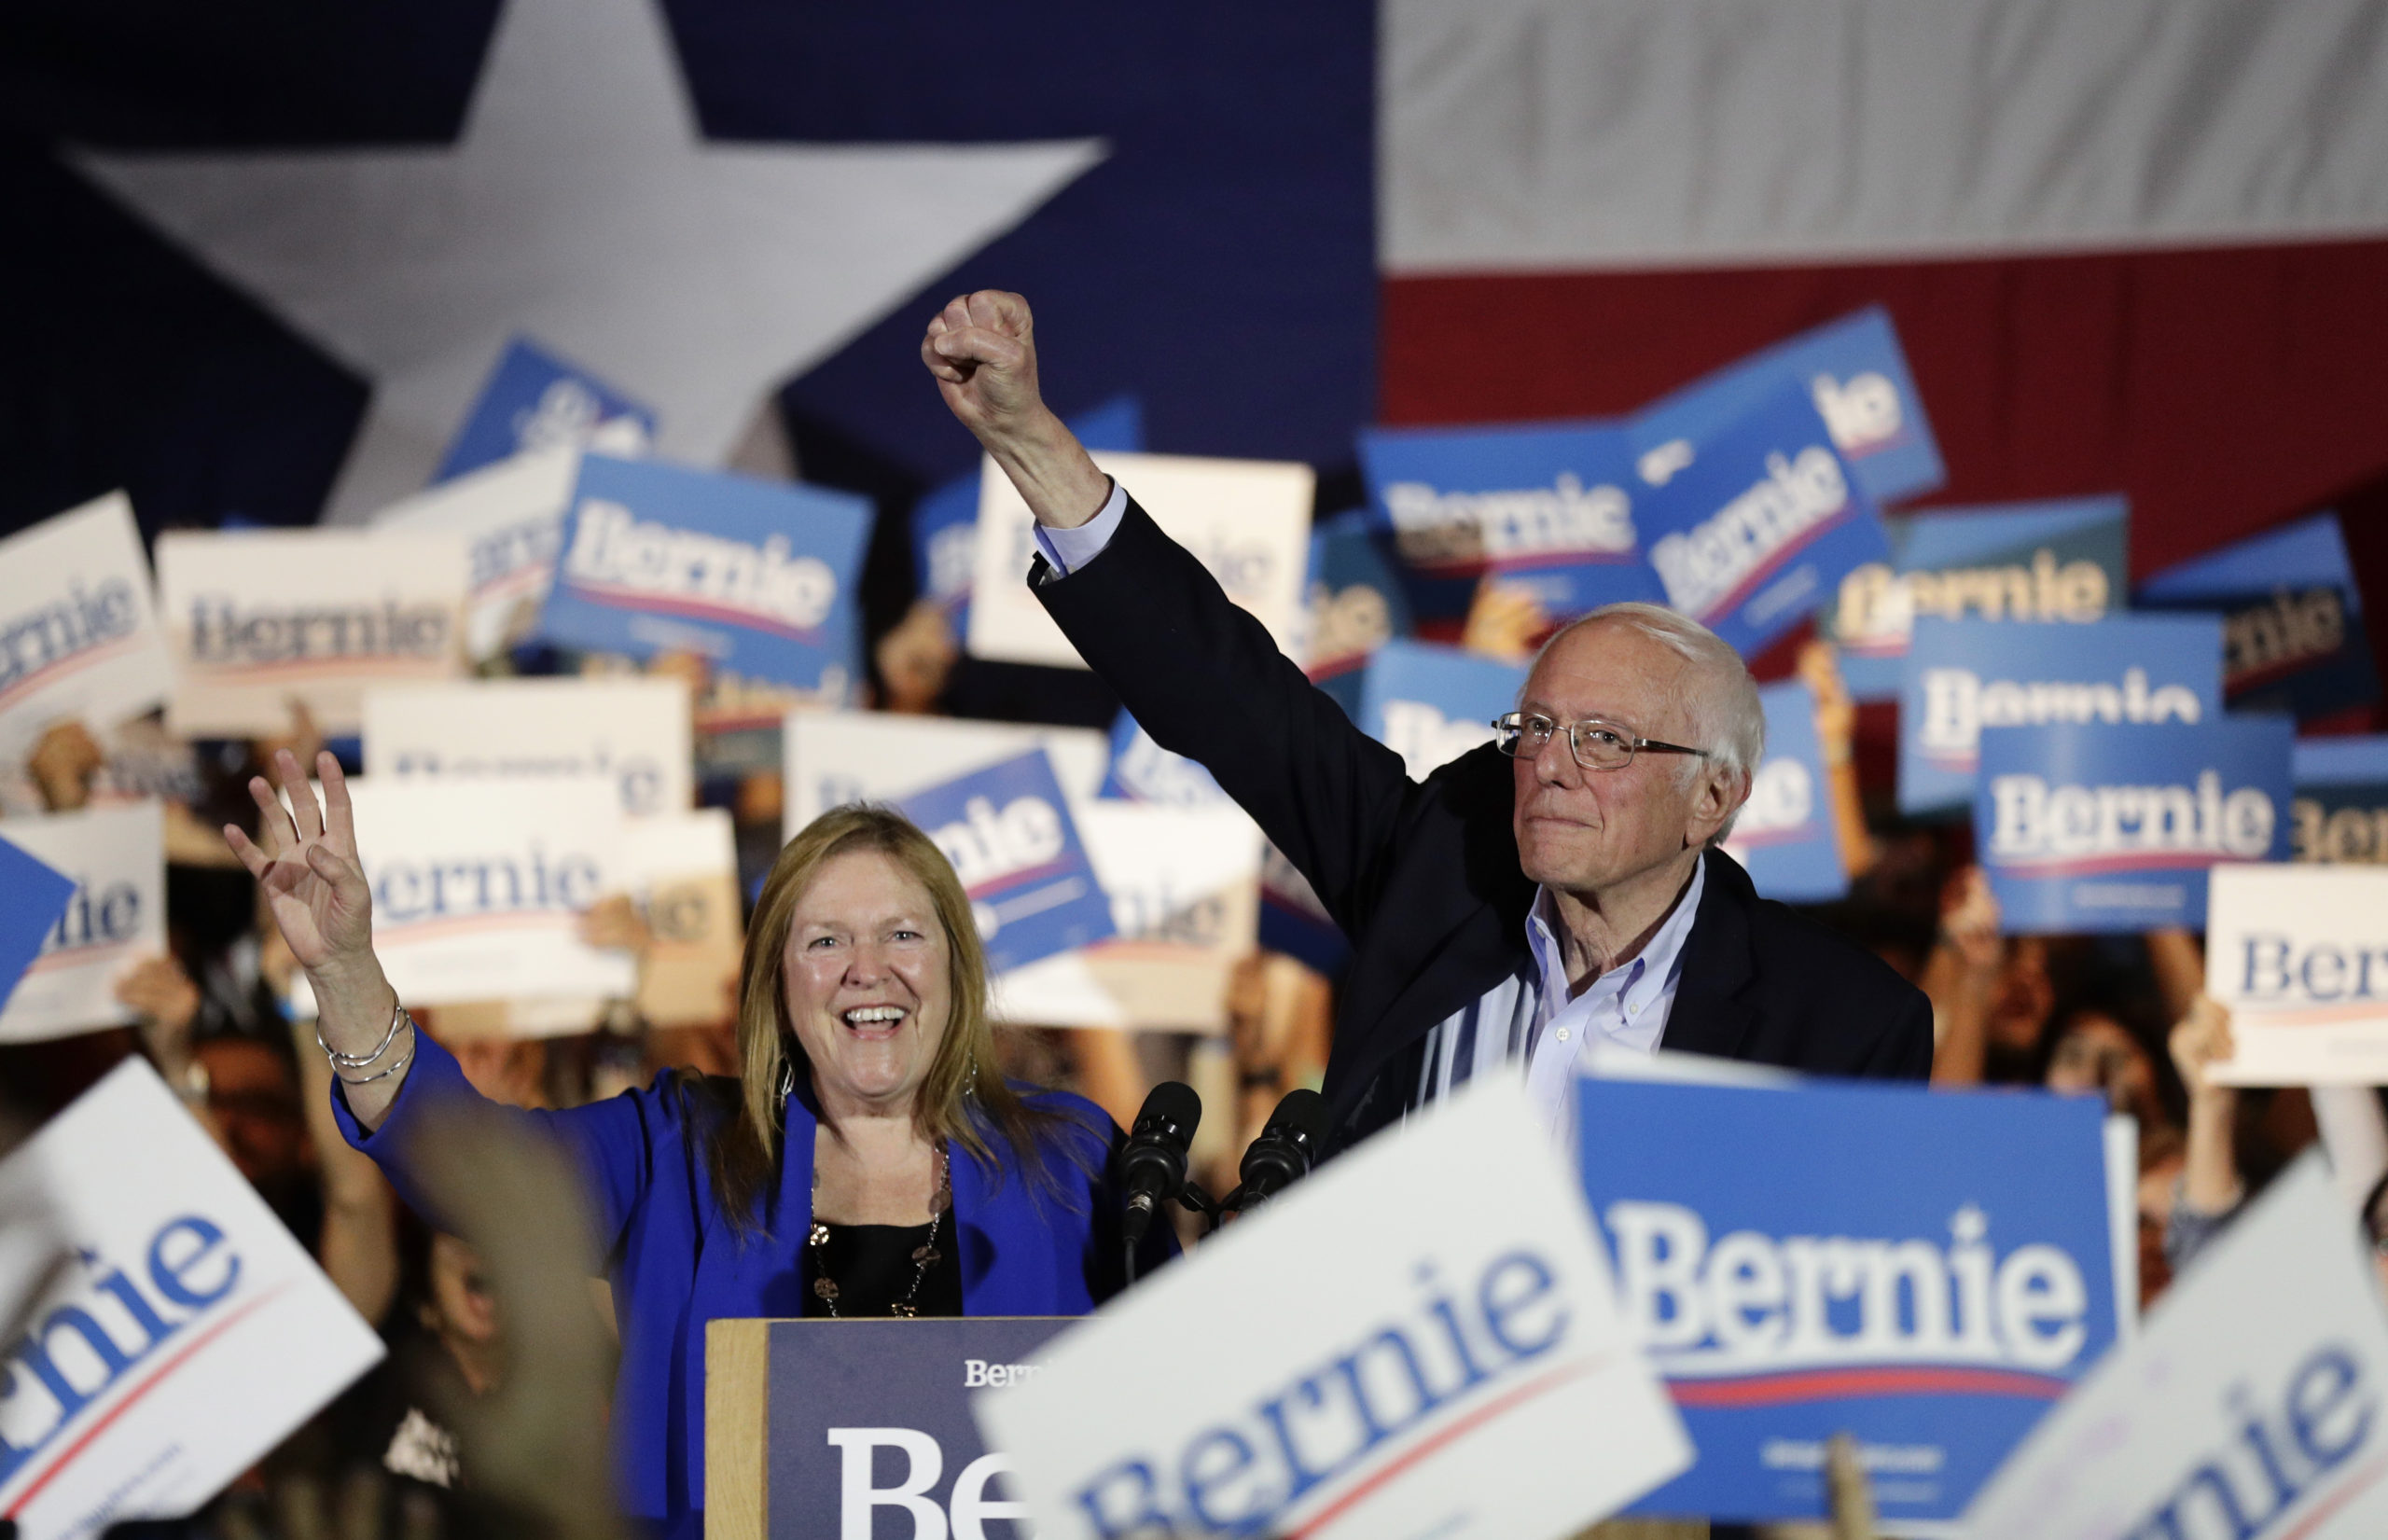 Bernie Sanders surrounded by supporters at a campaign rally in Texas.